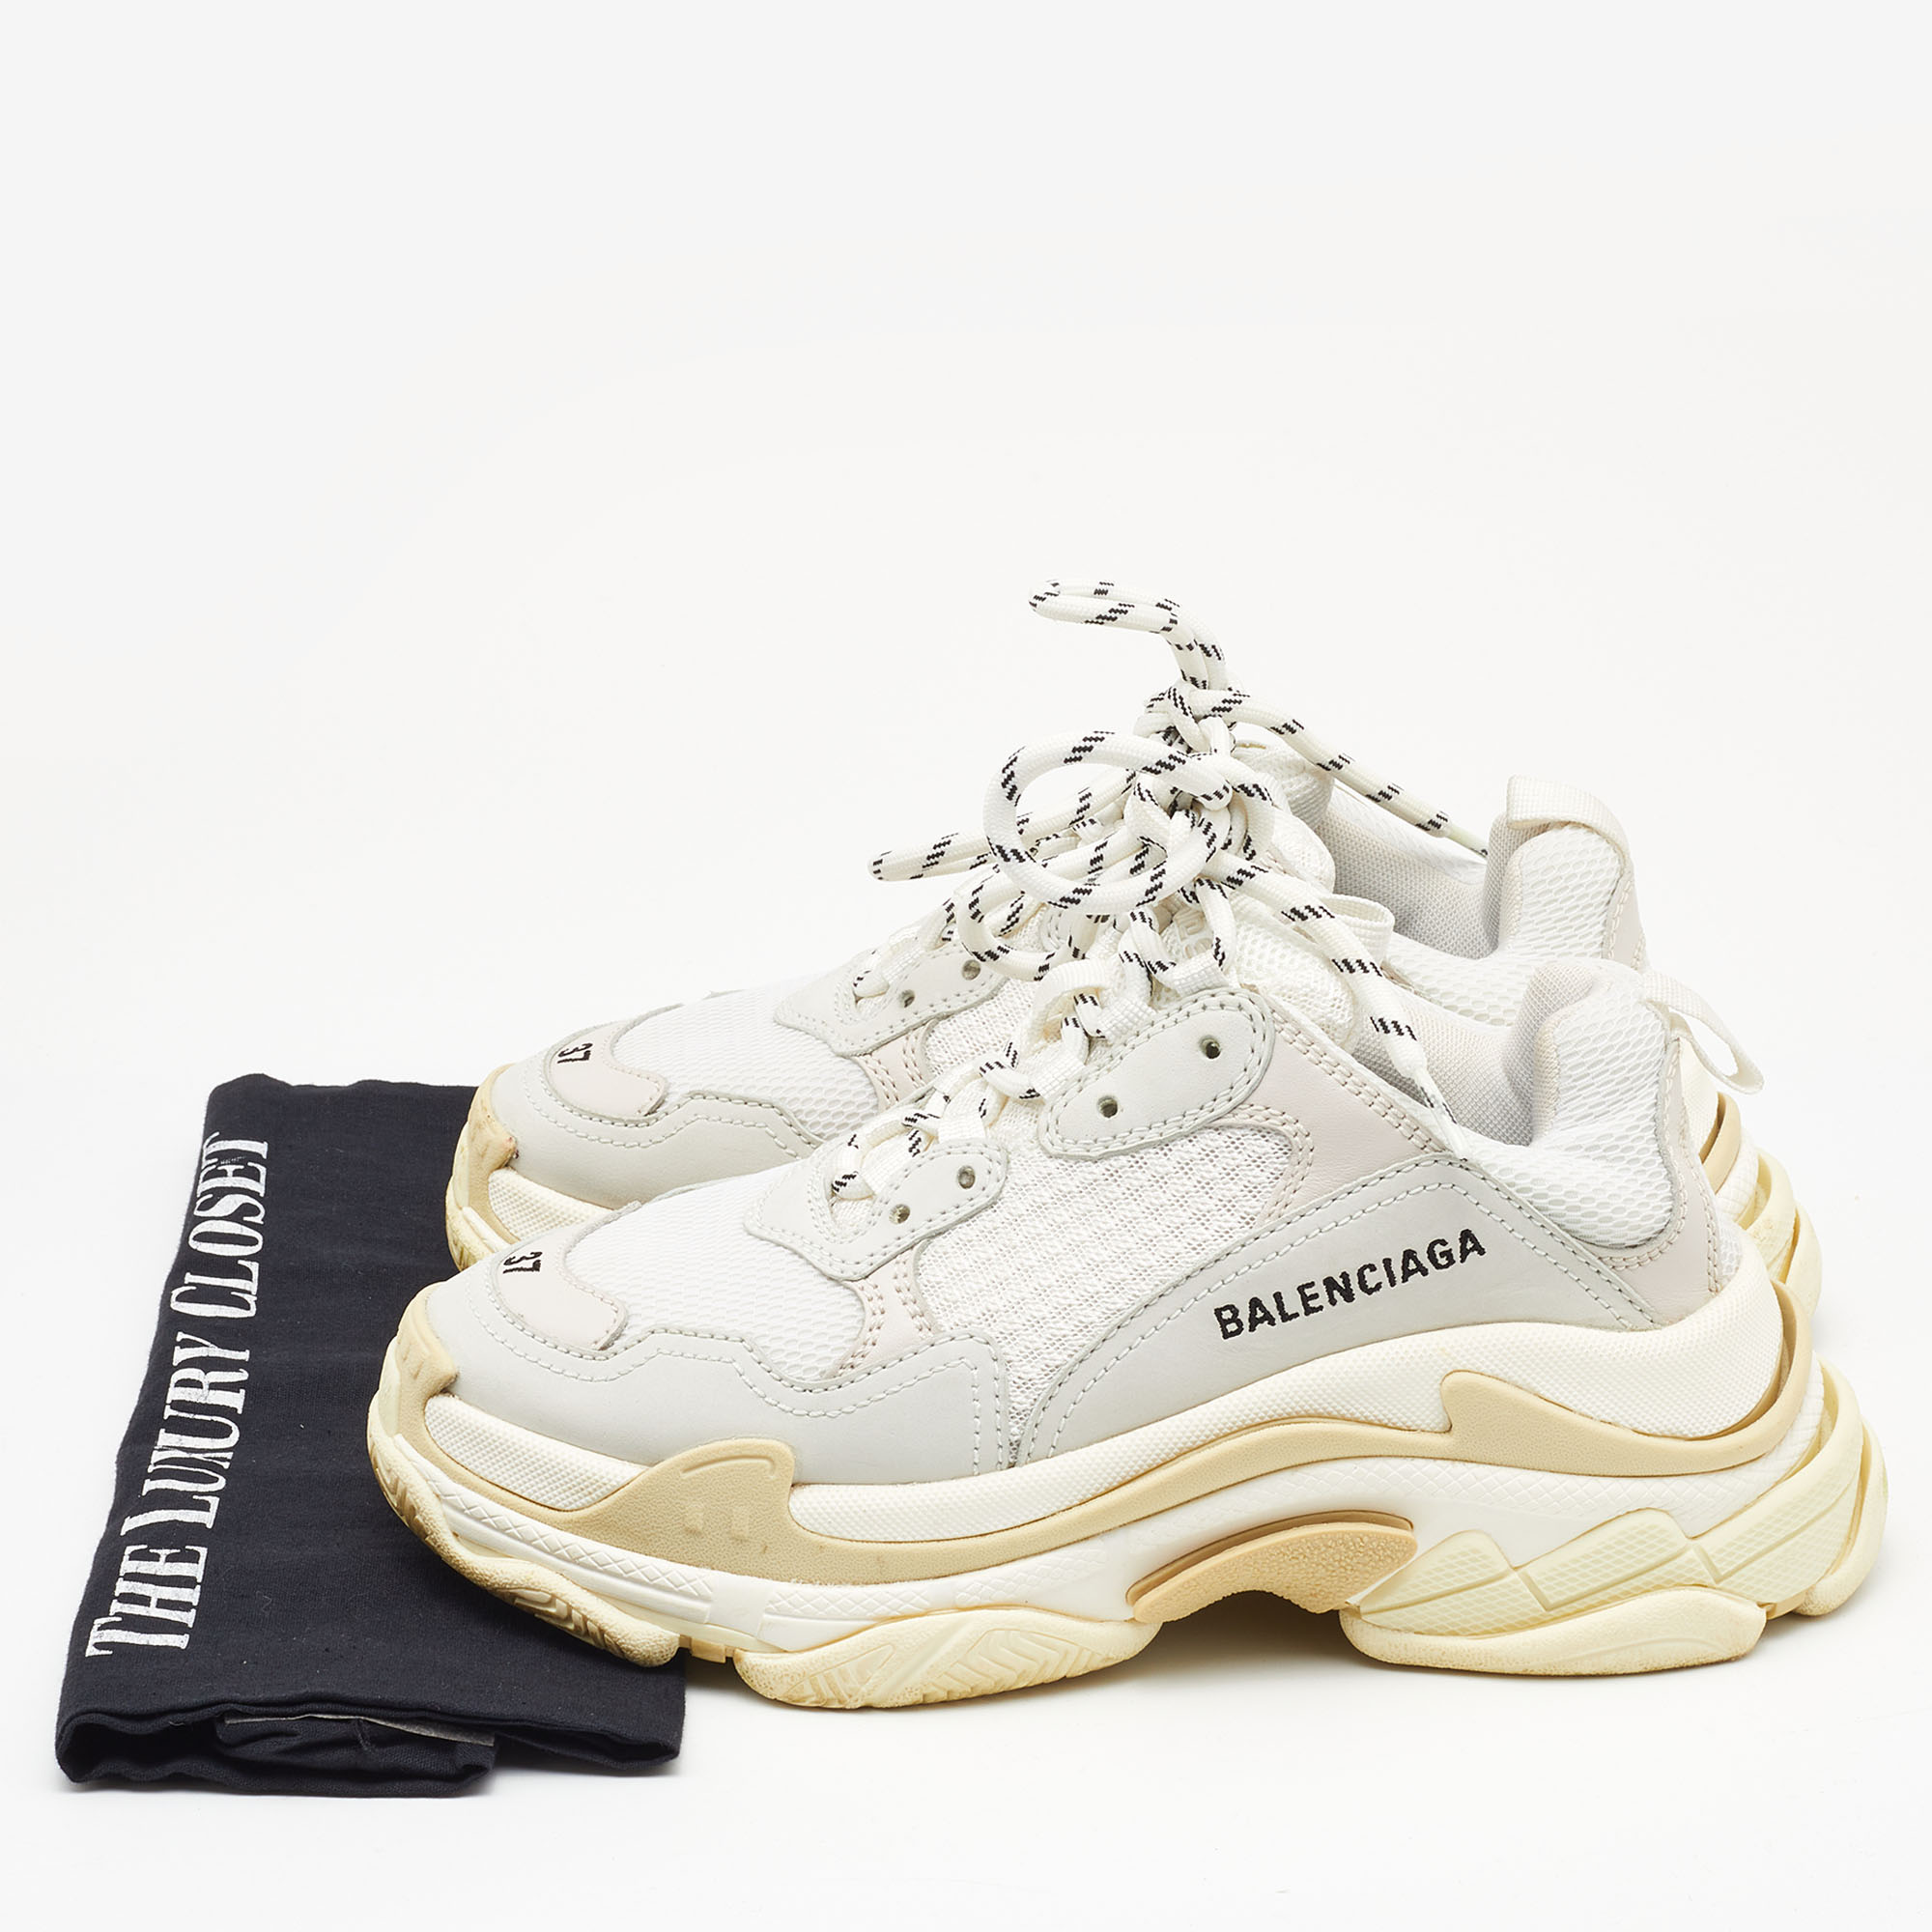 Balenciaga Grey/White Leather And Mesh Triple S Sneakers Size 37